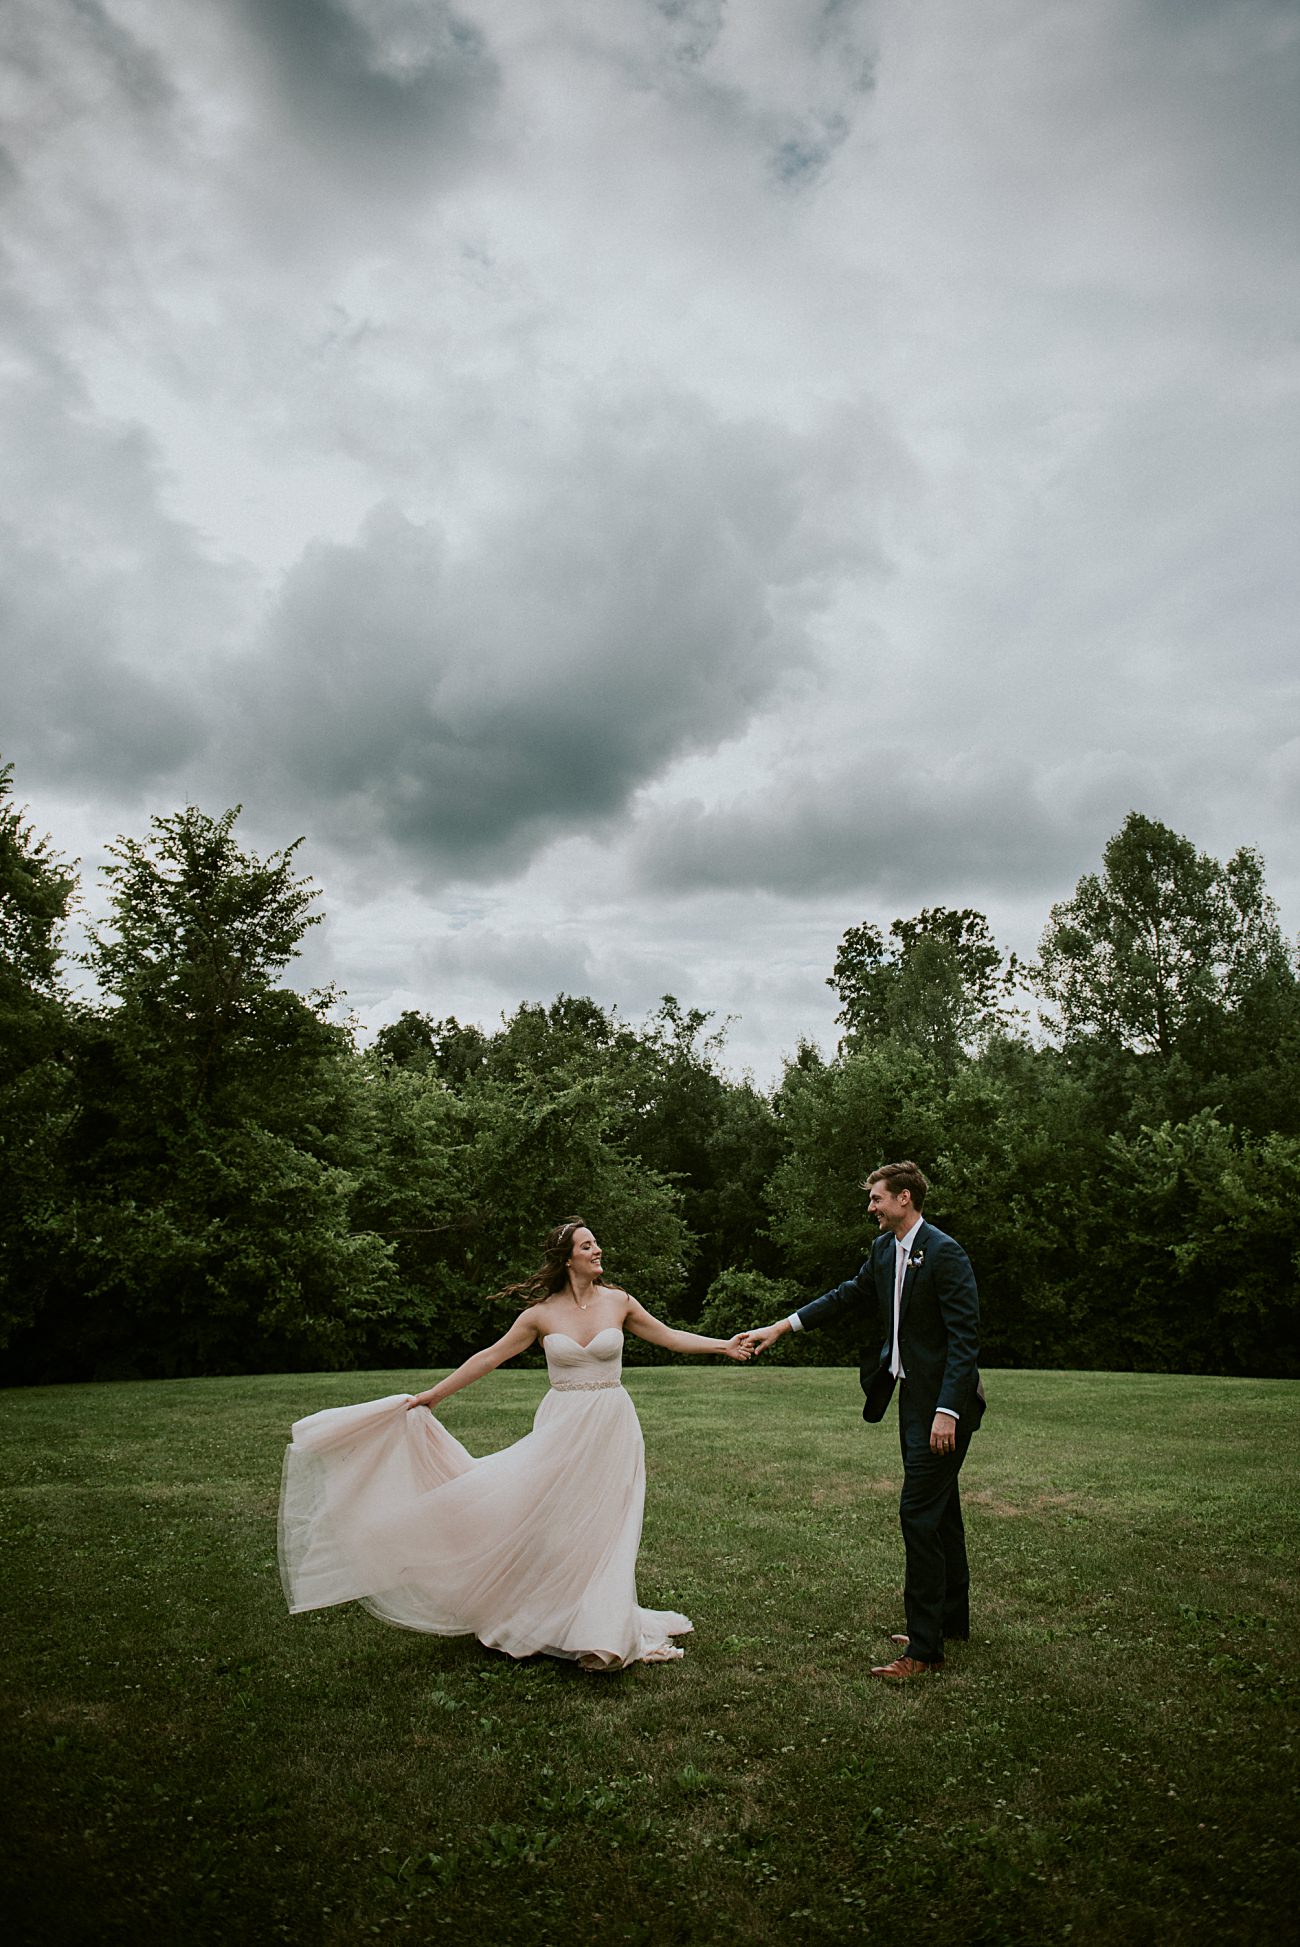 Bride and Groom Photos, Couples photos on wedding days, Stormy sky's, Blush wedding gown, Backyard Hilltop Wedding in Spring Green Wisconsin, Madison WI Wedding Photographer